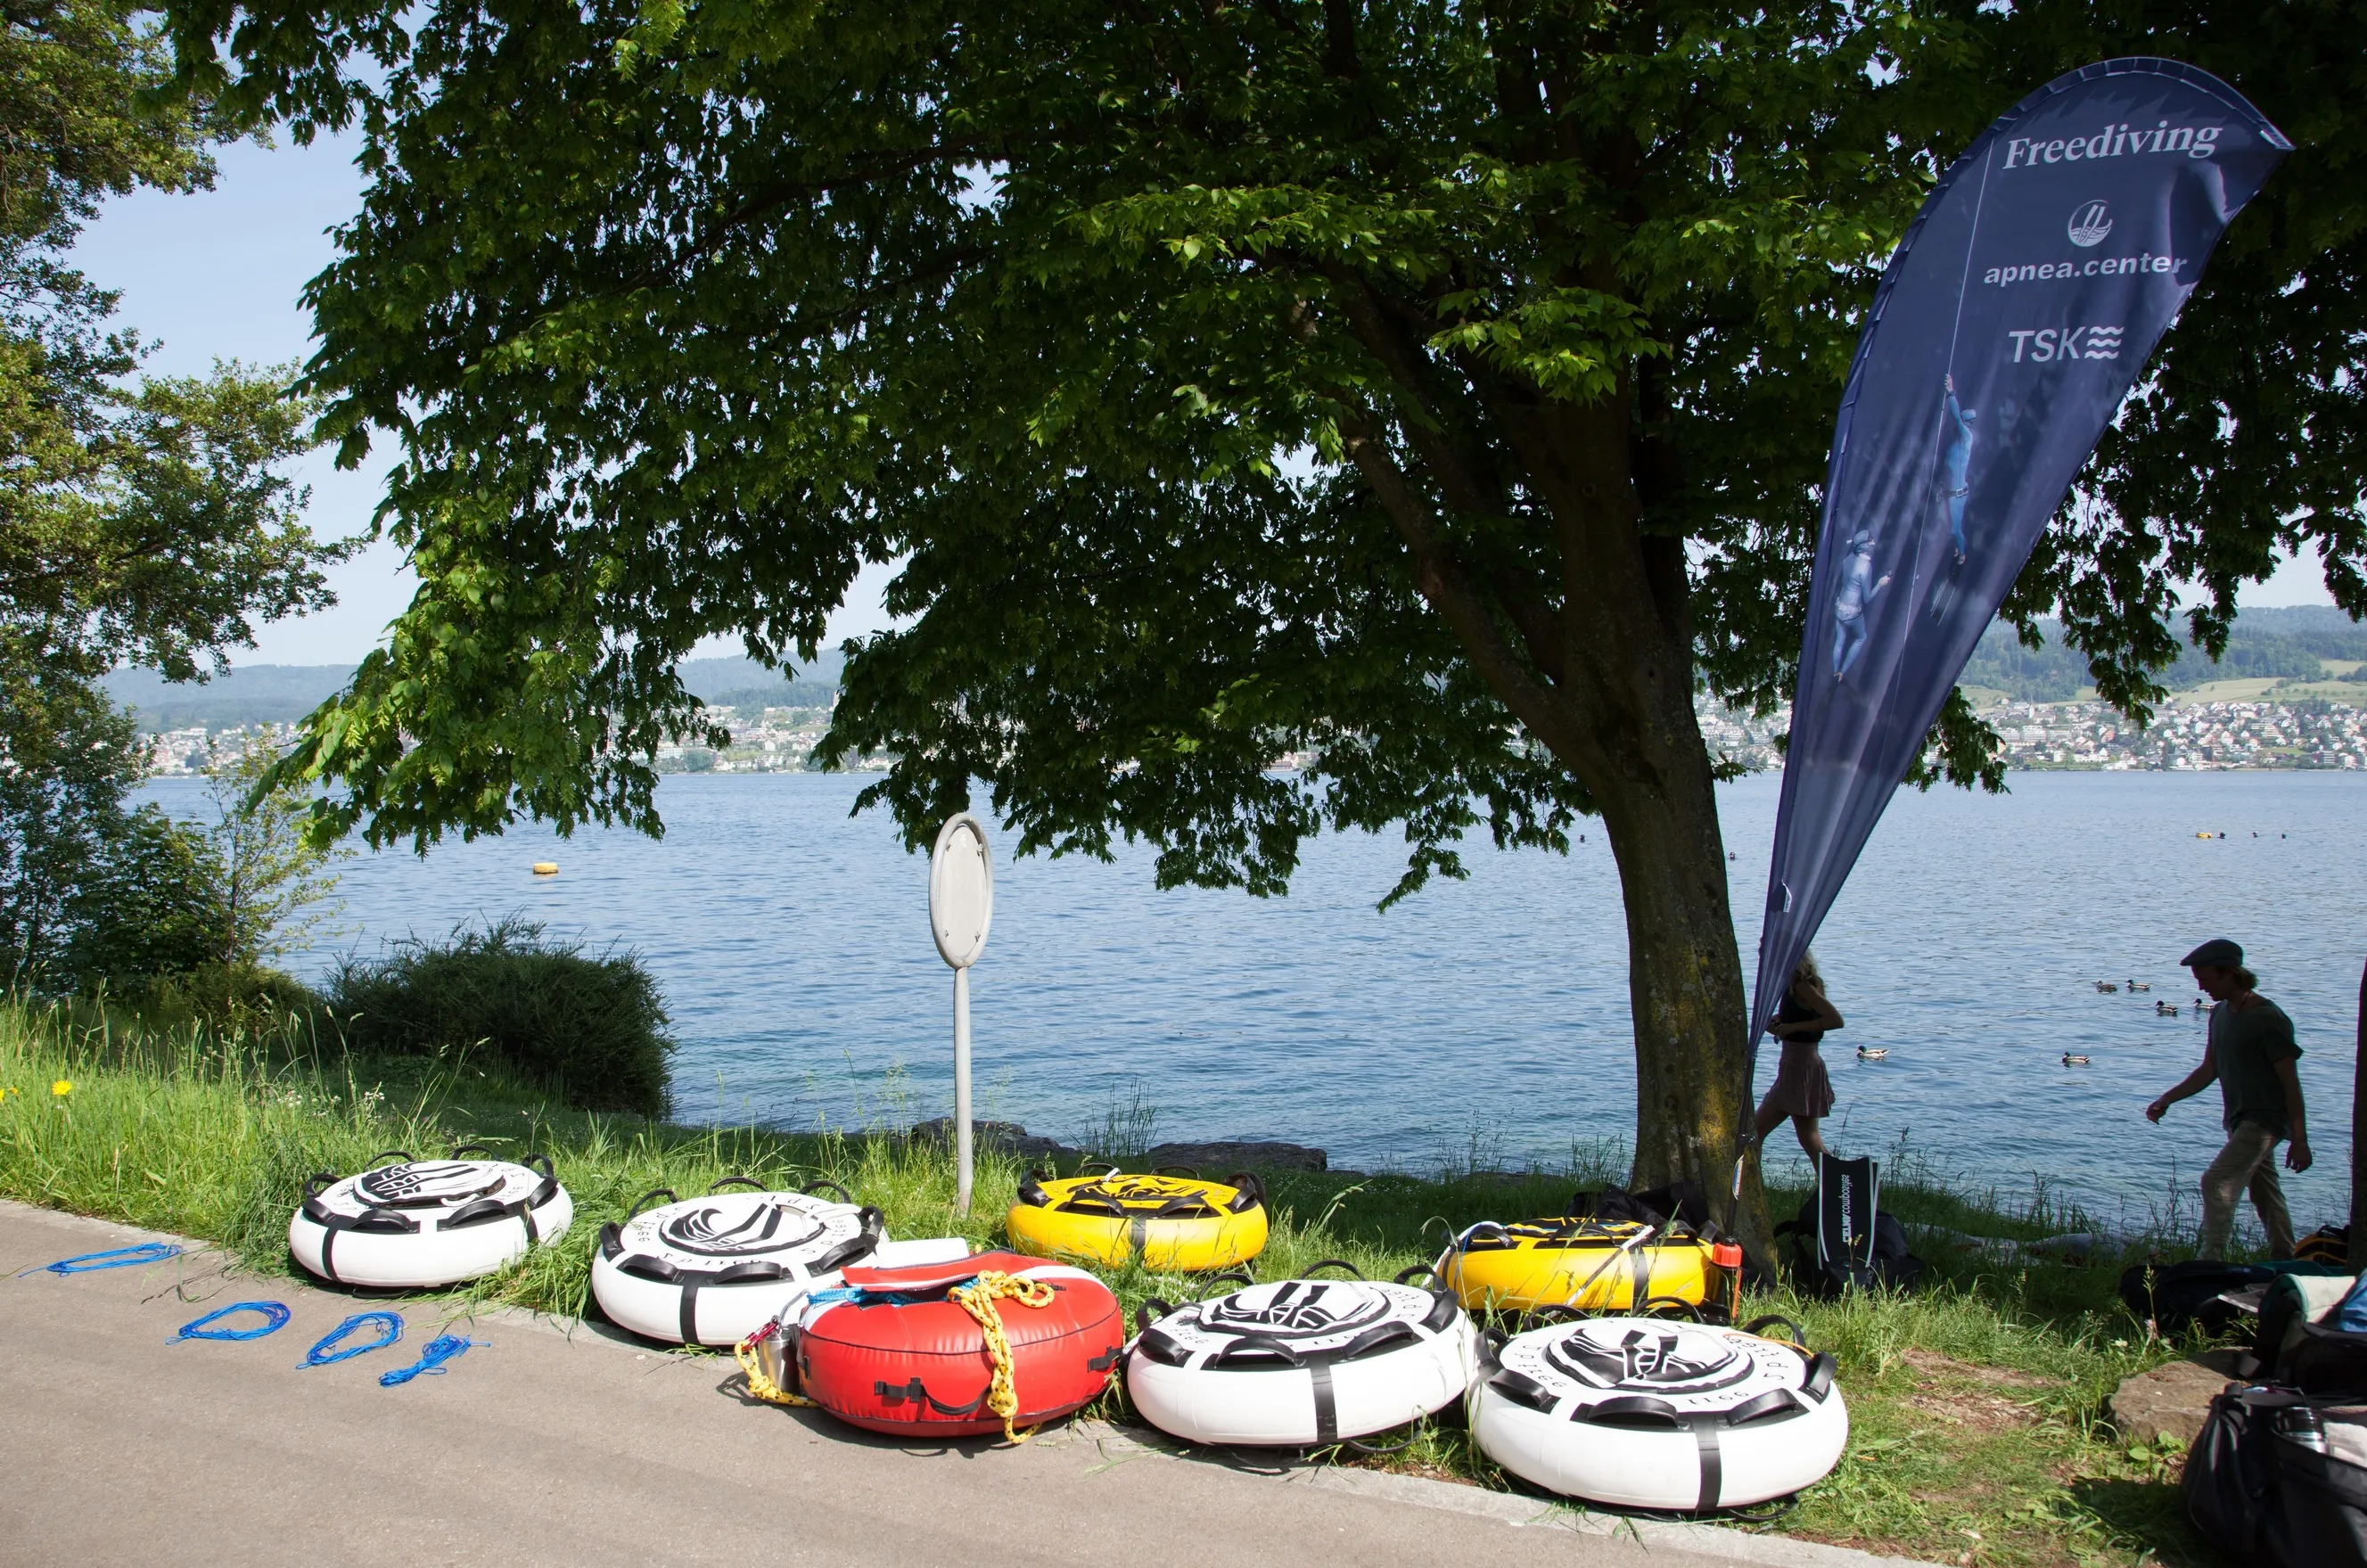 A photo of freediving preparations for the season opening in Zurich.